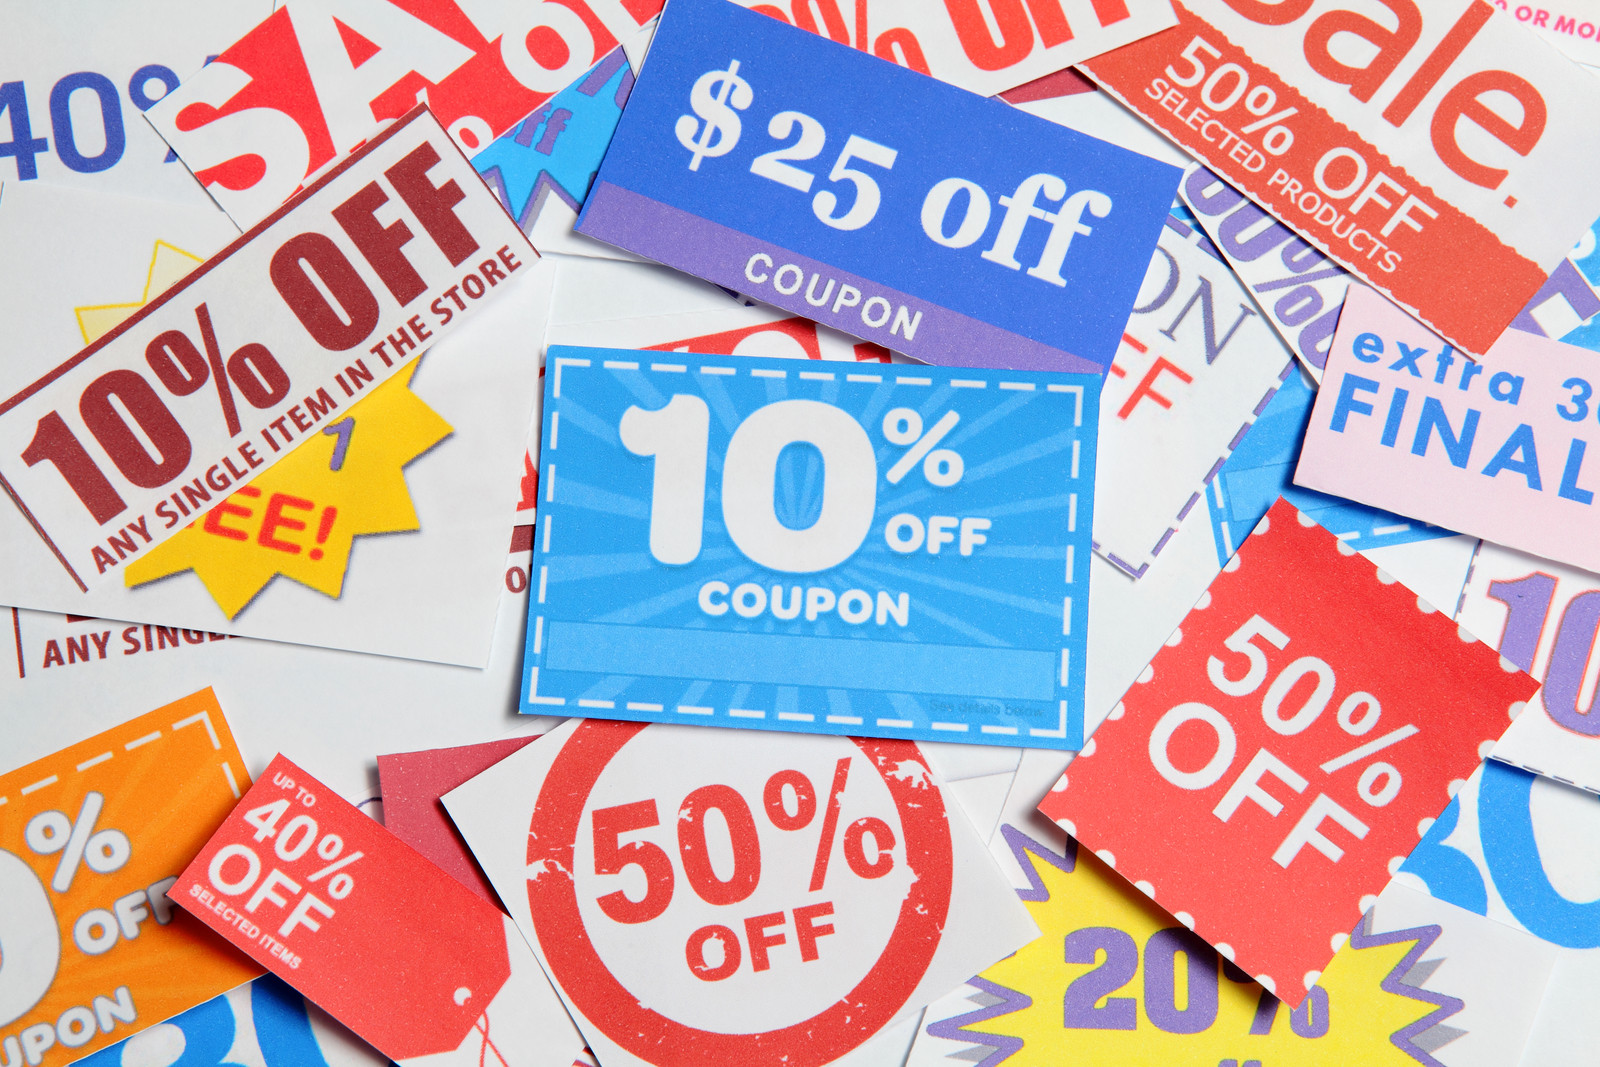 Types of Coupons Accepted At Walmart